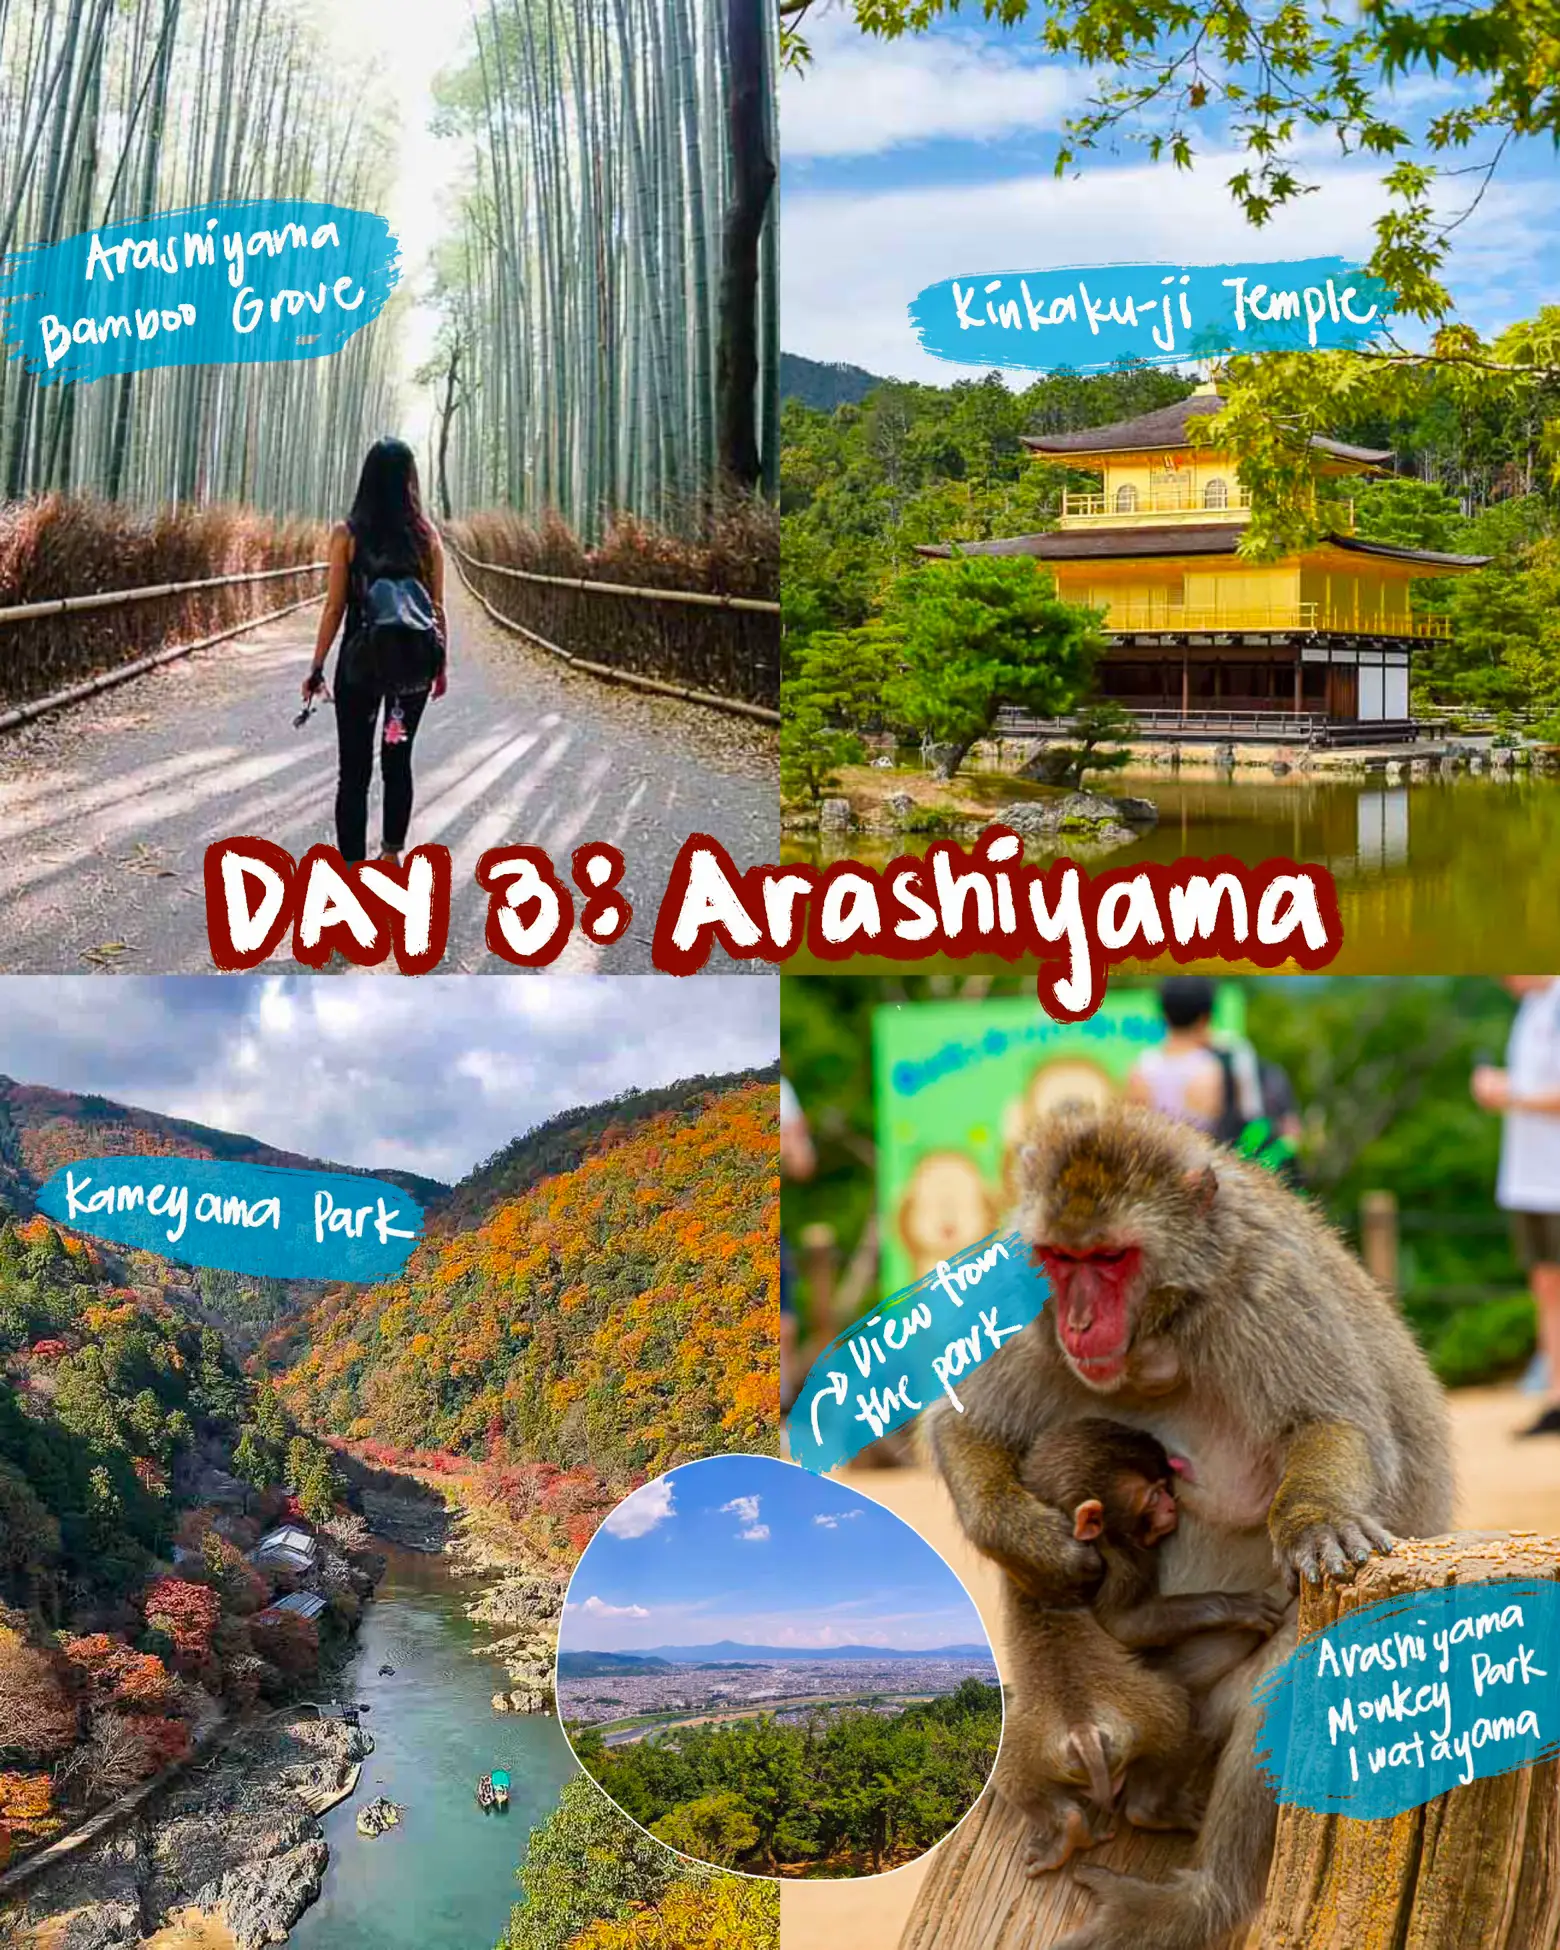  🍣🥢 6D5N Kyoto-based Itinerary (HIDDEN GEMS) 🇯🇵🎋's images(3)